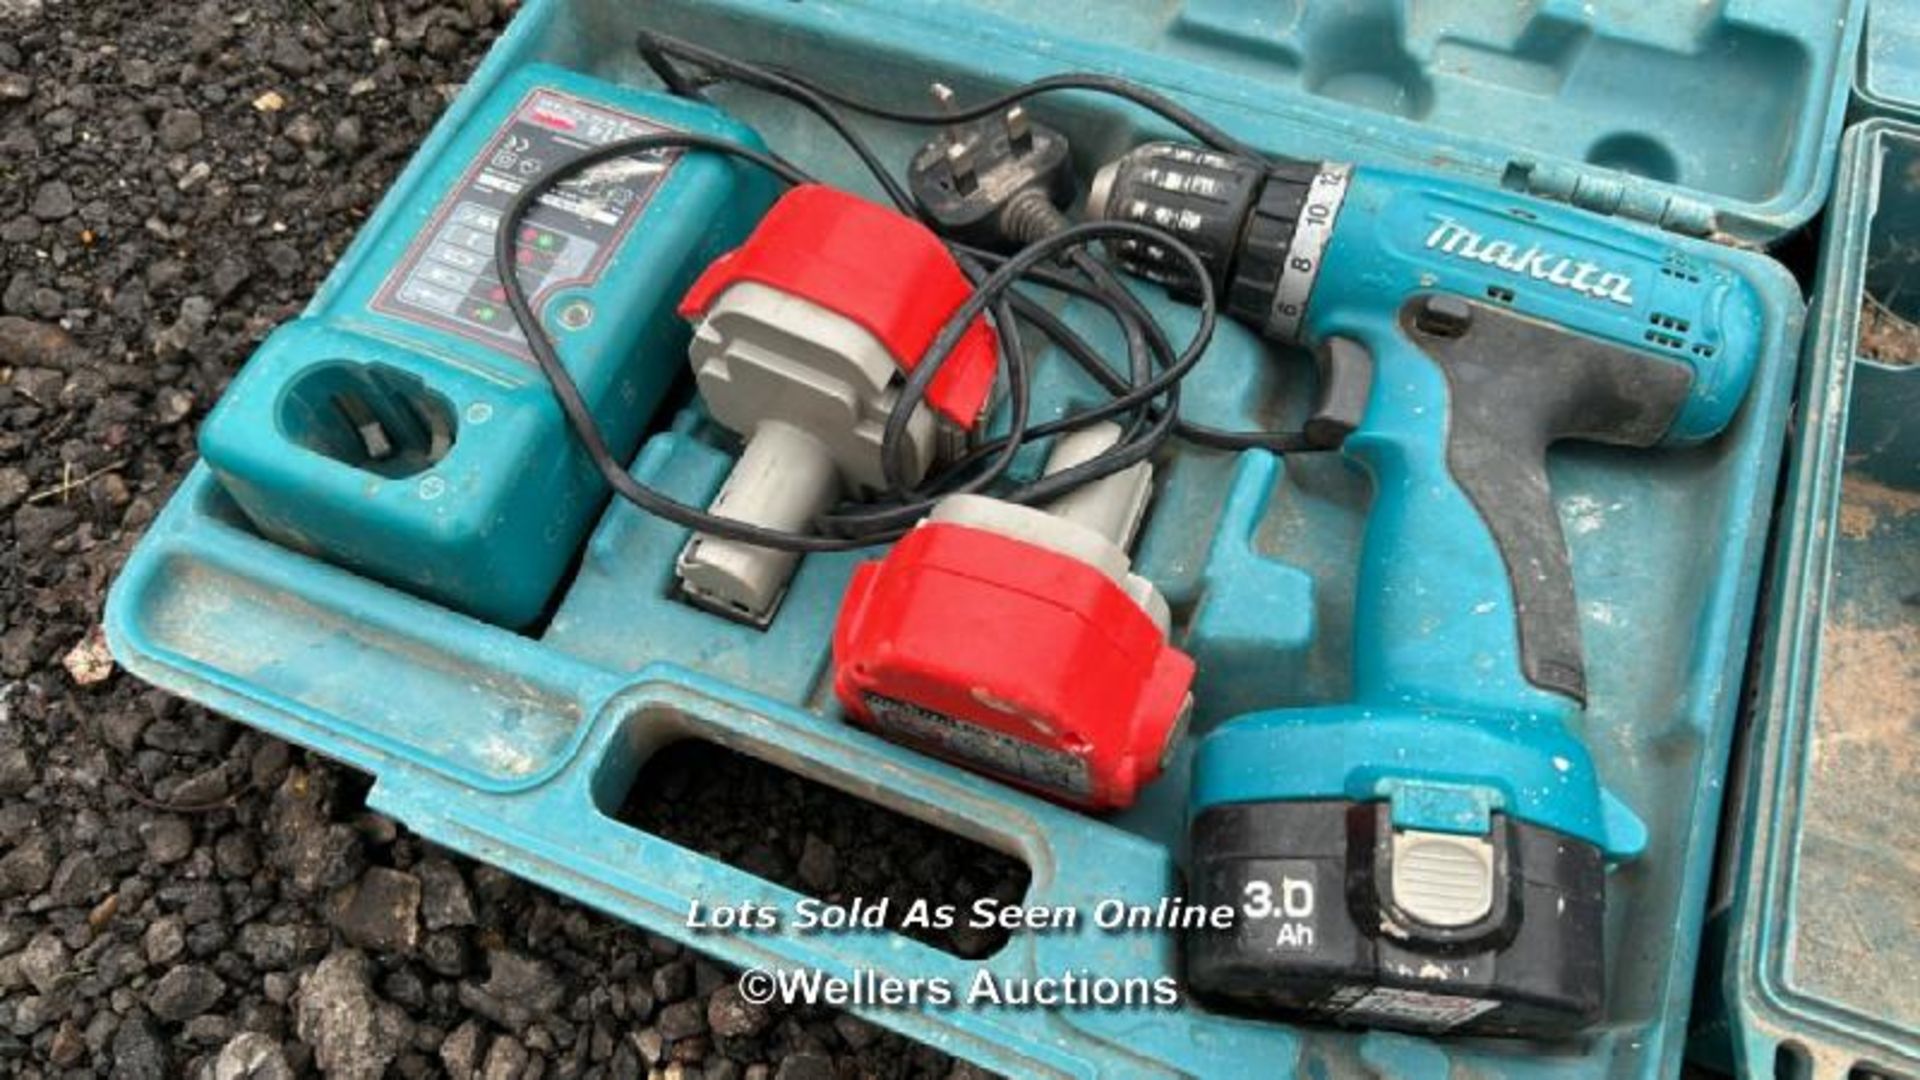 2X POWER TOOLS, INCL. MAKITA 6280D (INCL. 2X BATTERIES AND CHARGER), EINHELL 4" GRINDERETTE - Image 2 of 4